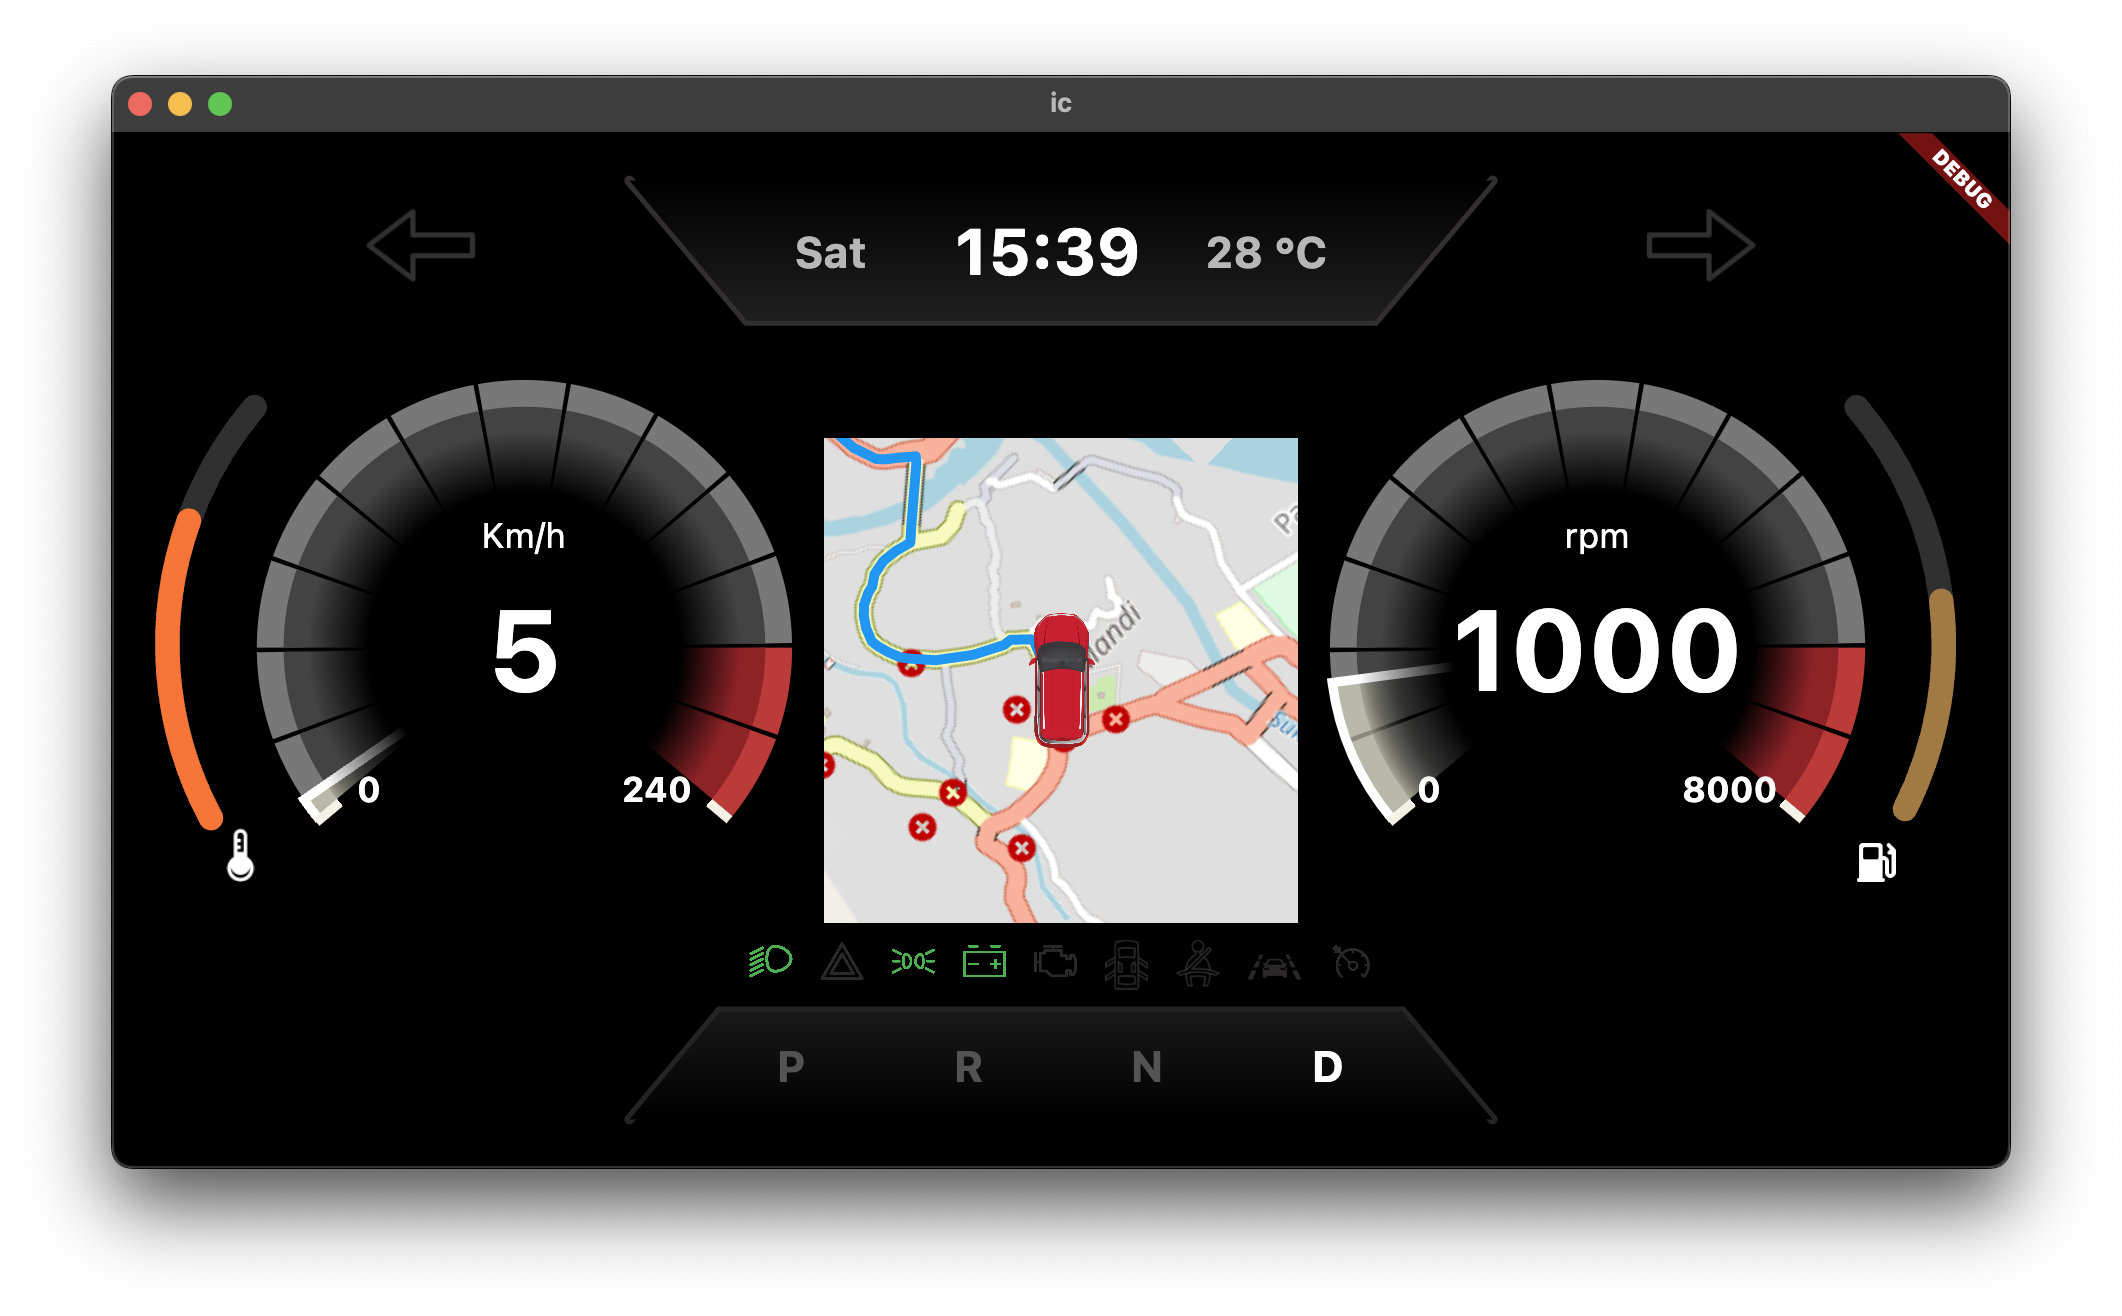 docs/0_Getting_Started/3_Build_and_Boot_guide_Profile/images/flutter_instrument_cluster_map.png